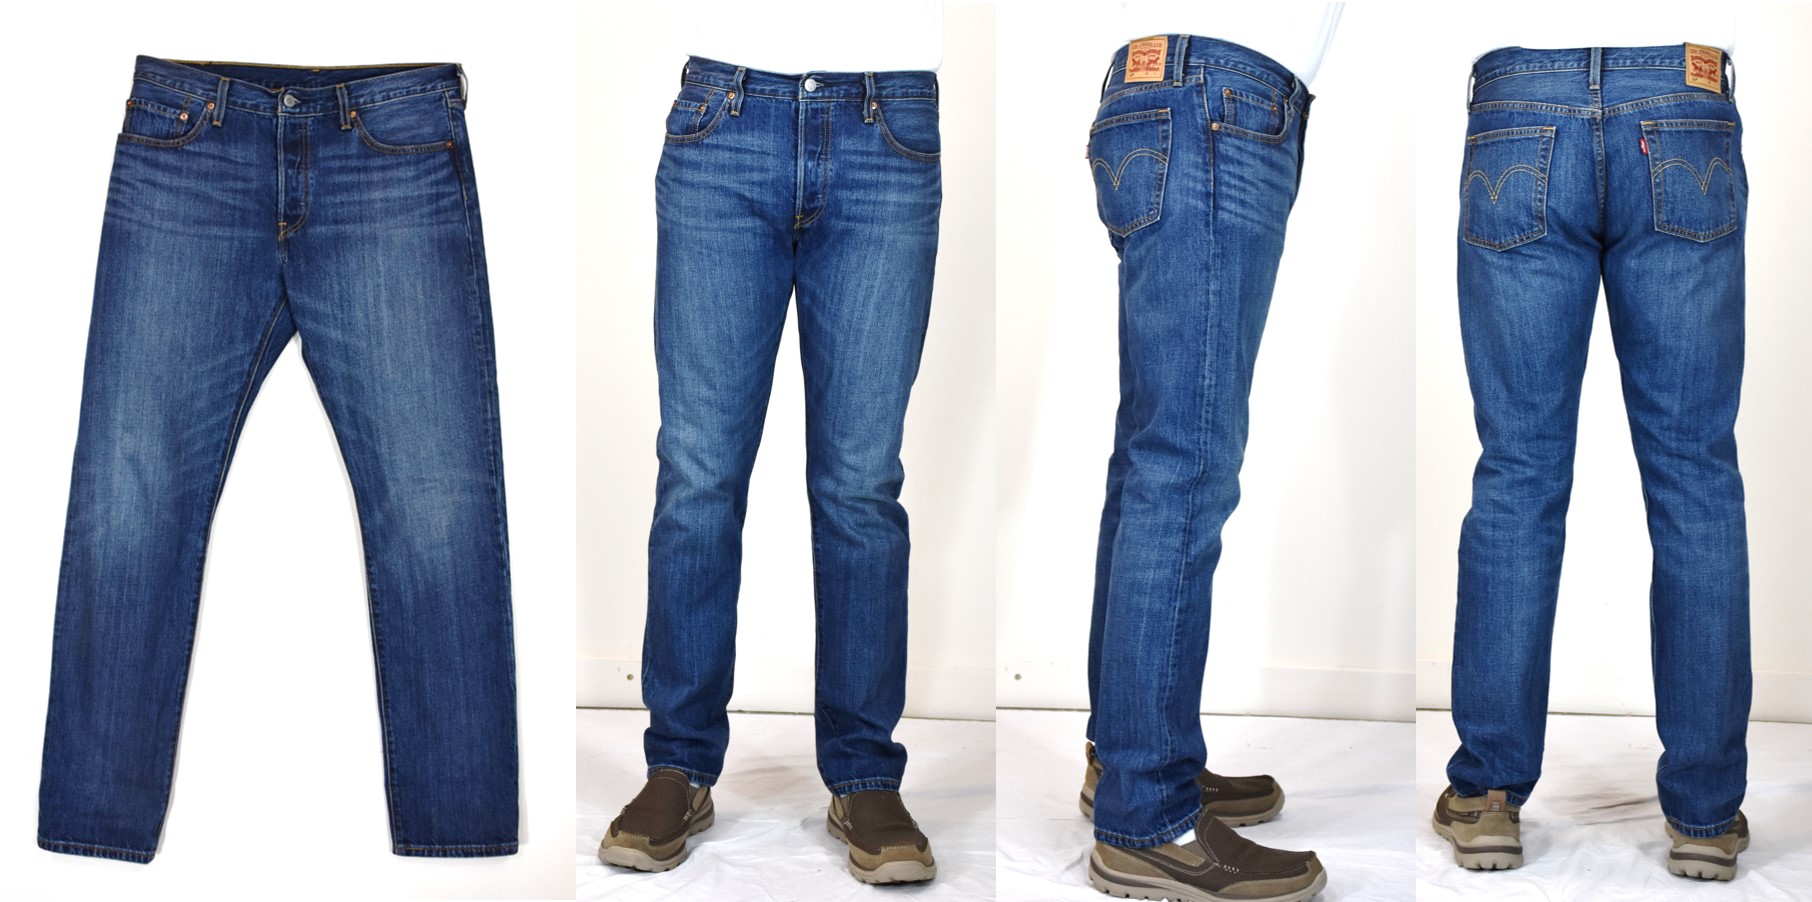 Are Levi’s Jeans Unisex? – THE JEANS BLOG